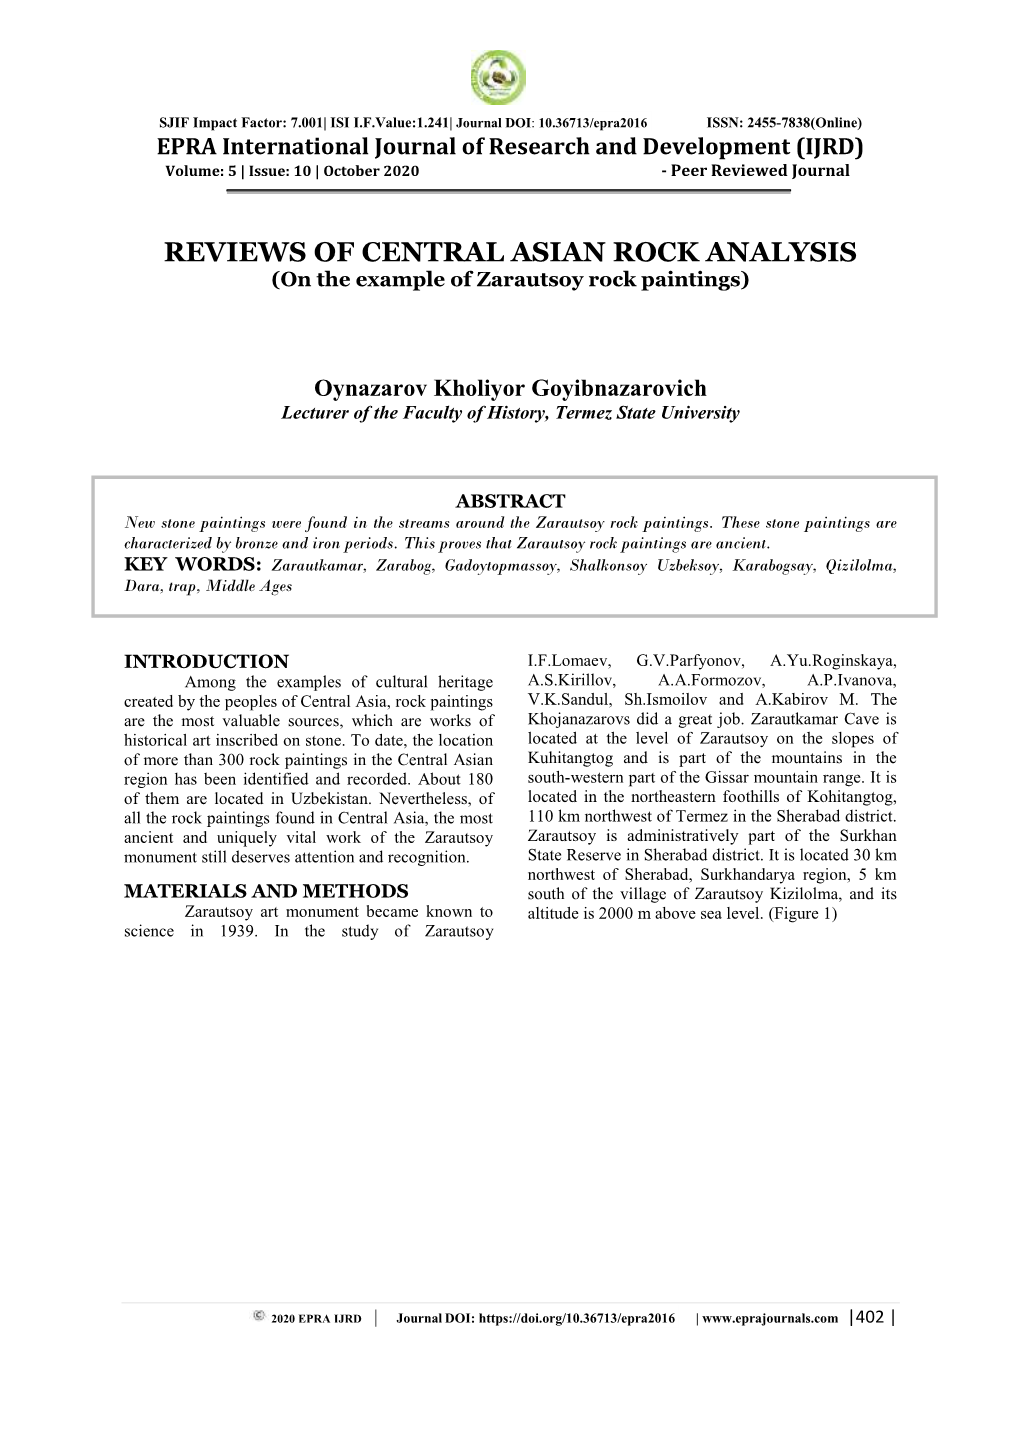 REVIEWS of CENTRAL ASIAN ROCK ANALYSIS (On the Example of Zarautsoy Rock Paintings)